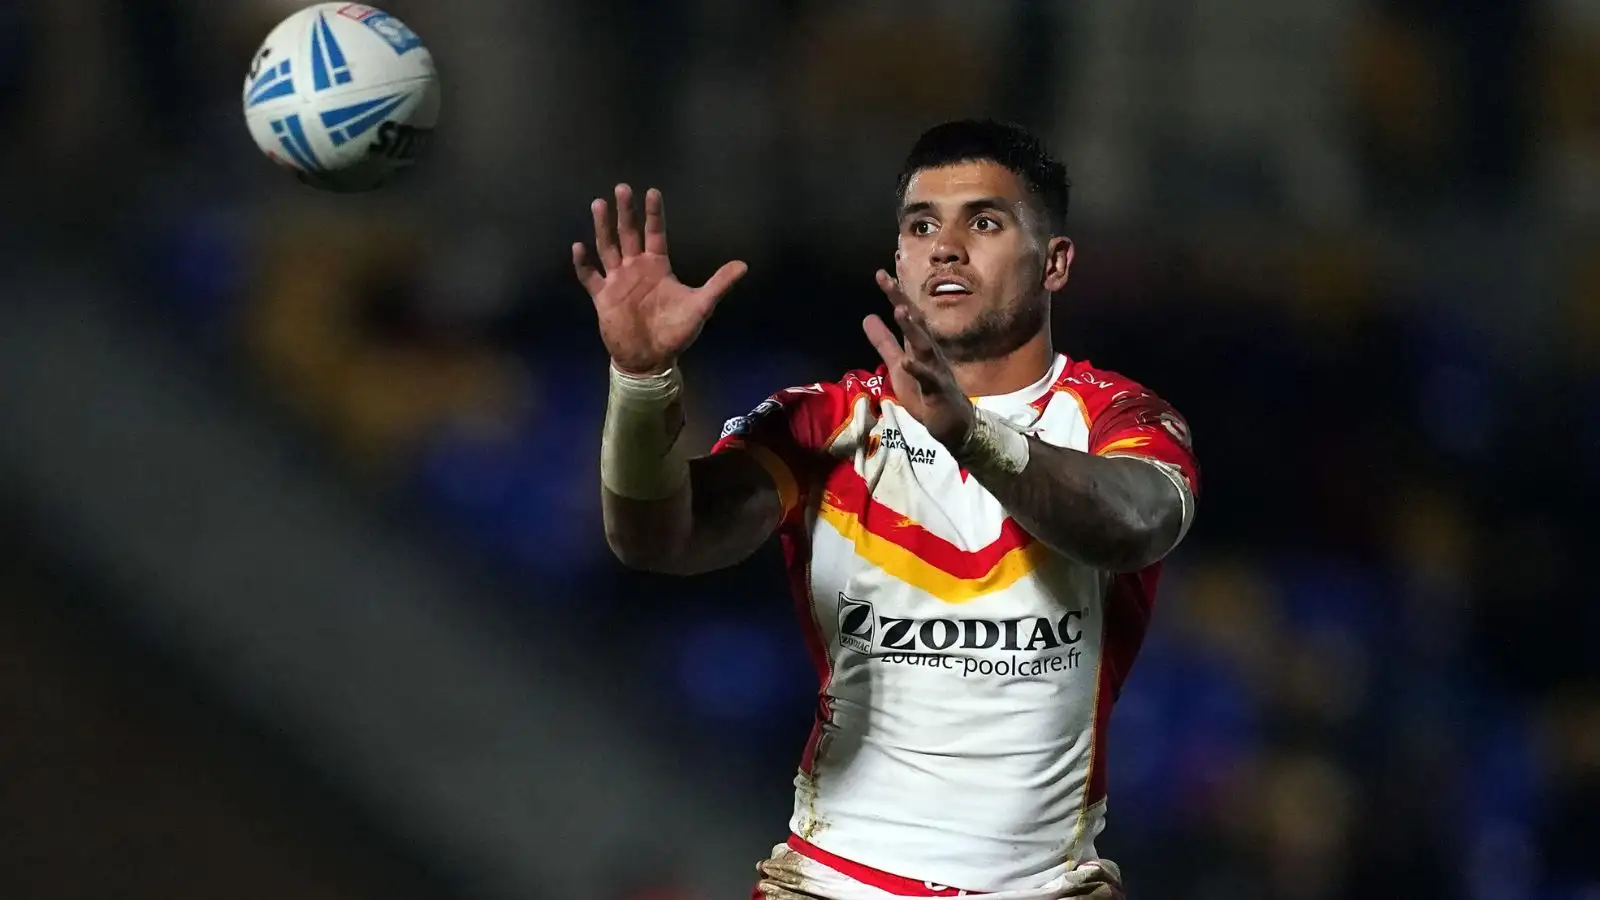 Catalans Dragons terminate contracts of three players including high-profile duo after ‘incident’